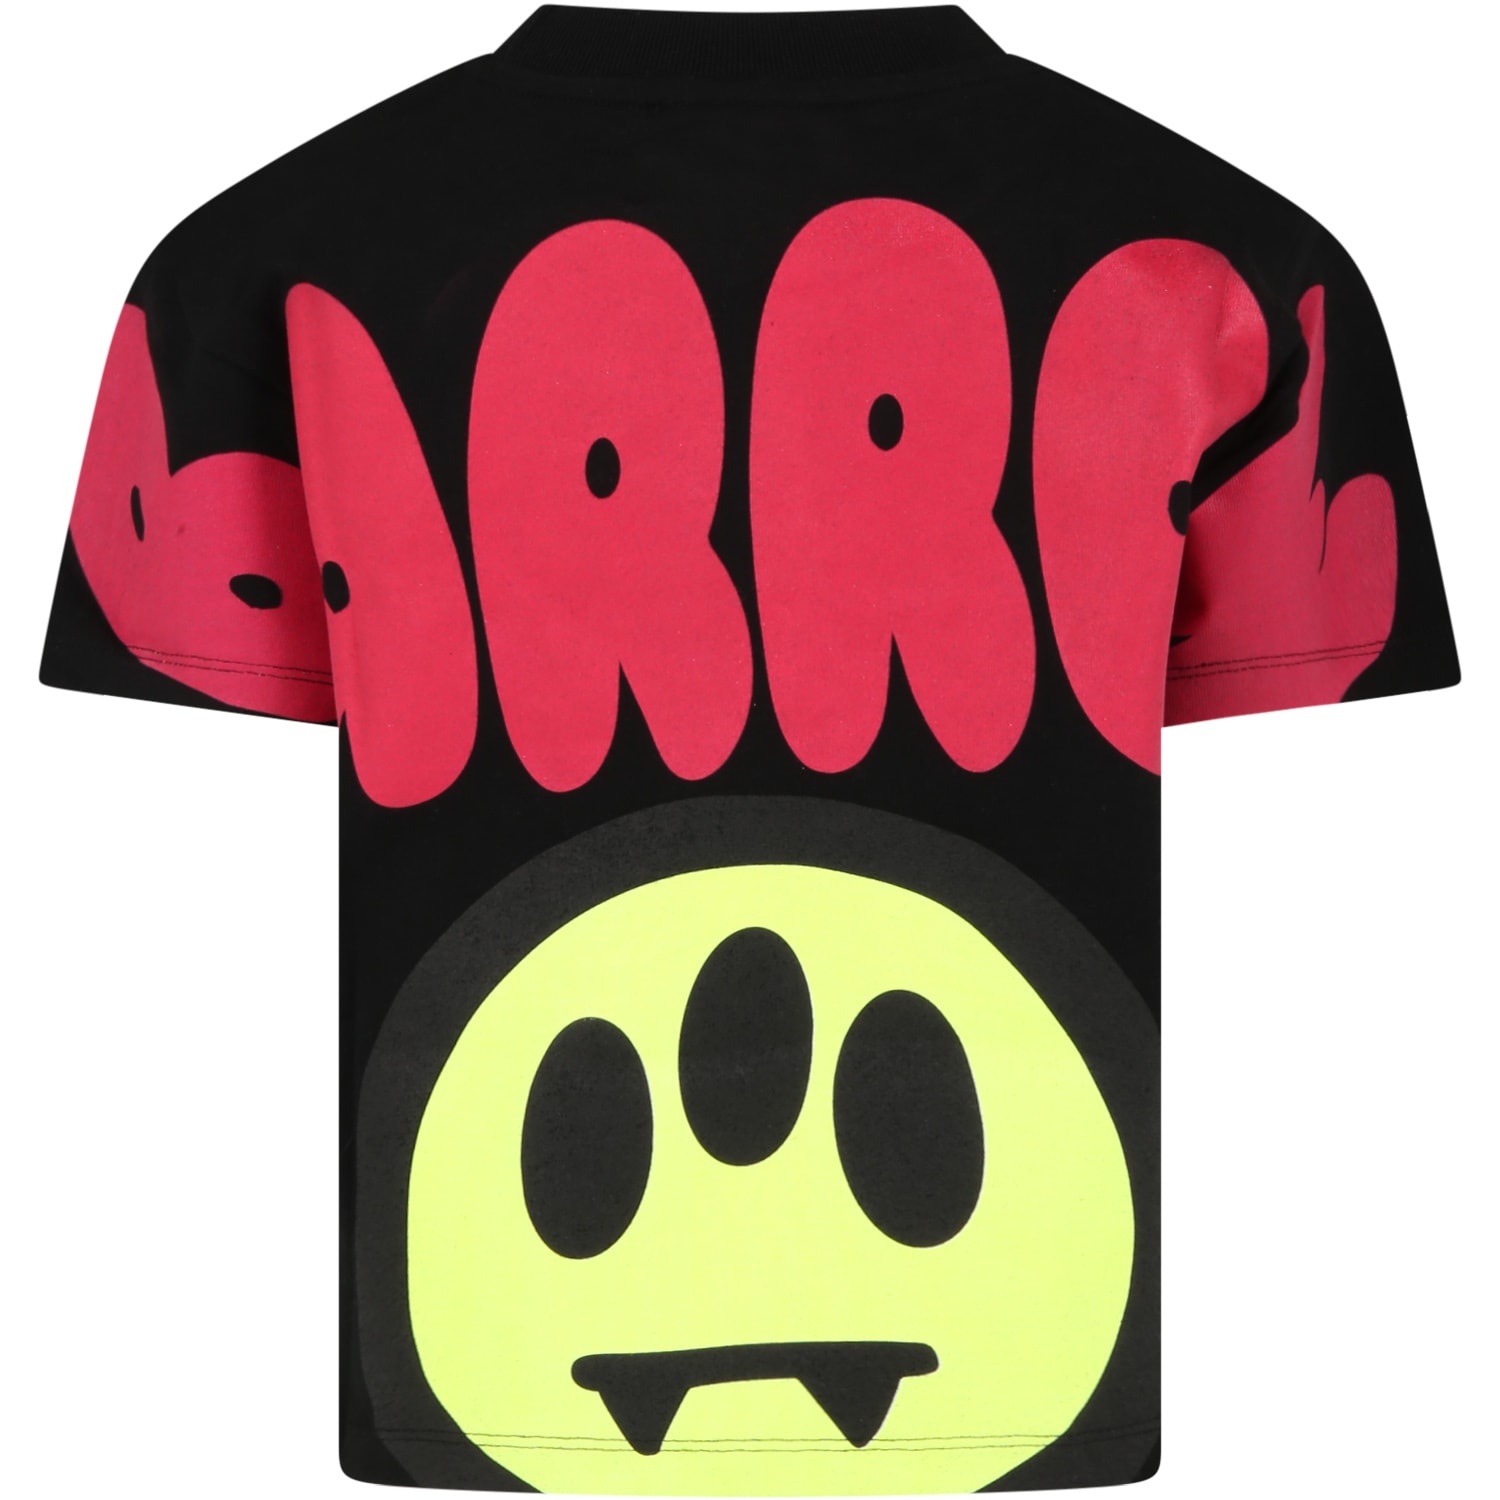 Barrow Black T-shirt For Kids With Logo And Iconic Smiley